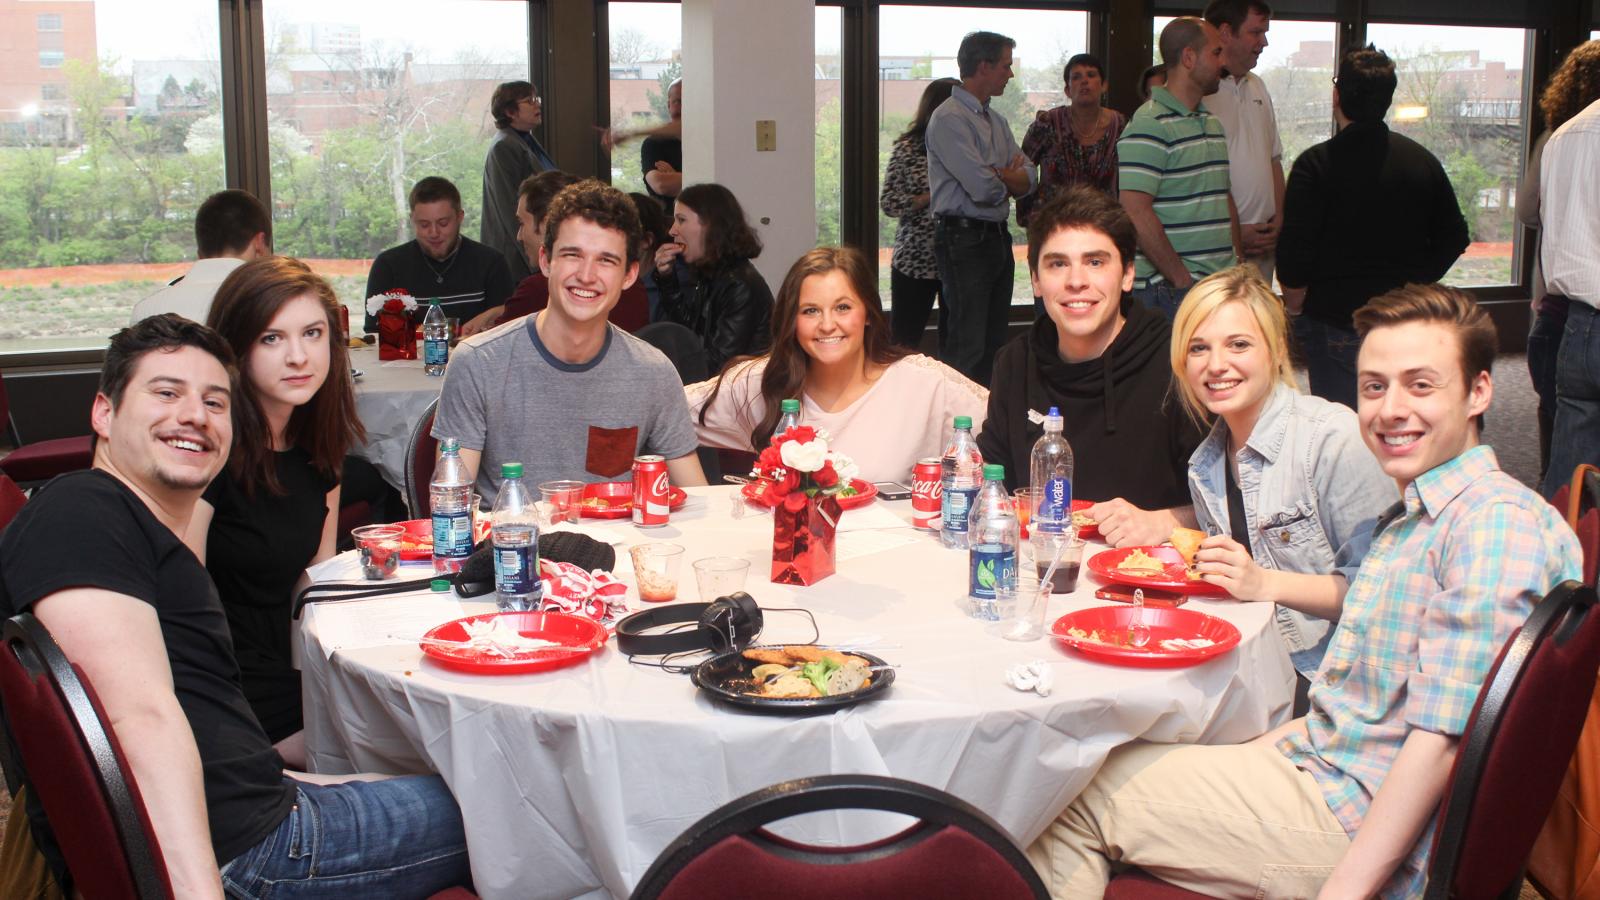 BA theatre students enjoying the End of Year Celebration dinner. 